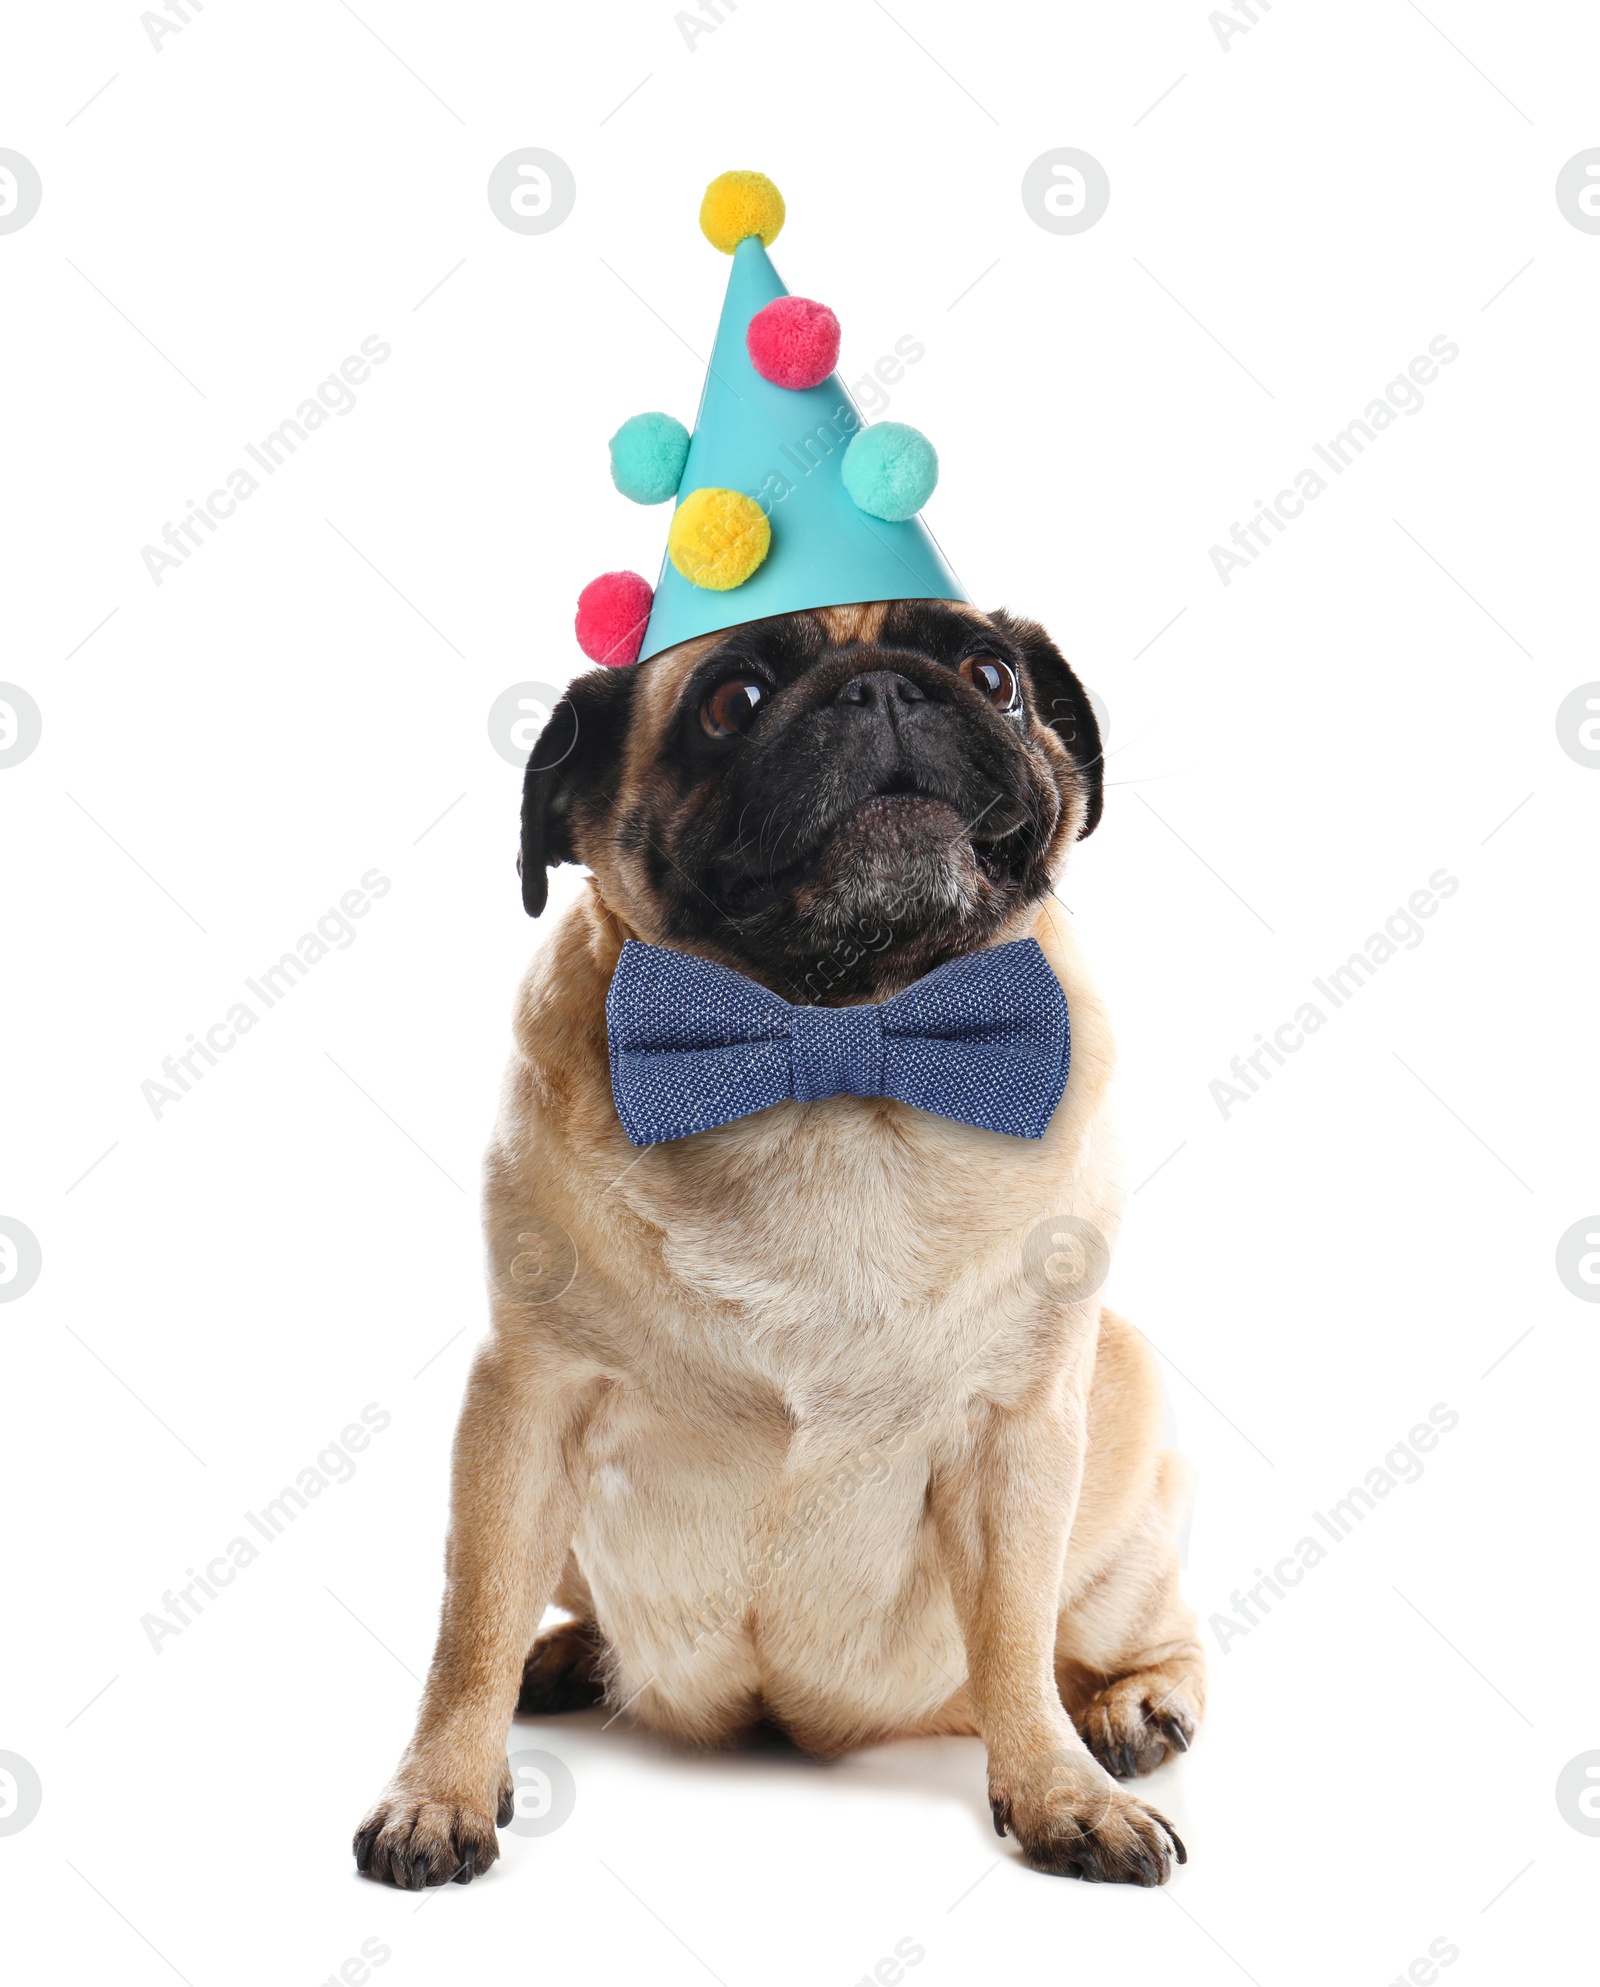 Image of Cute Pug dog with party hat and bow tie on white background